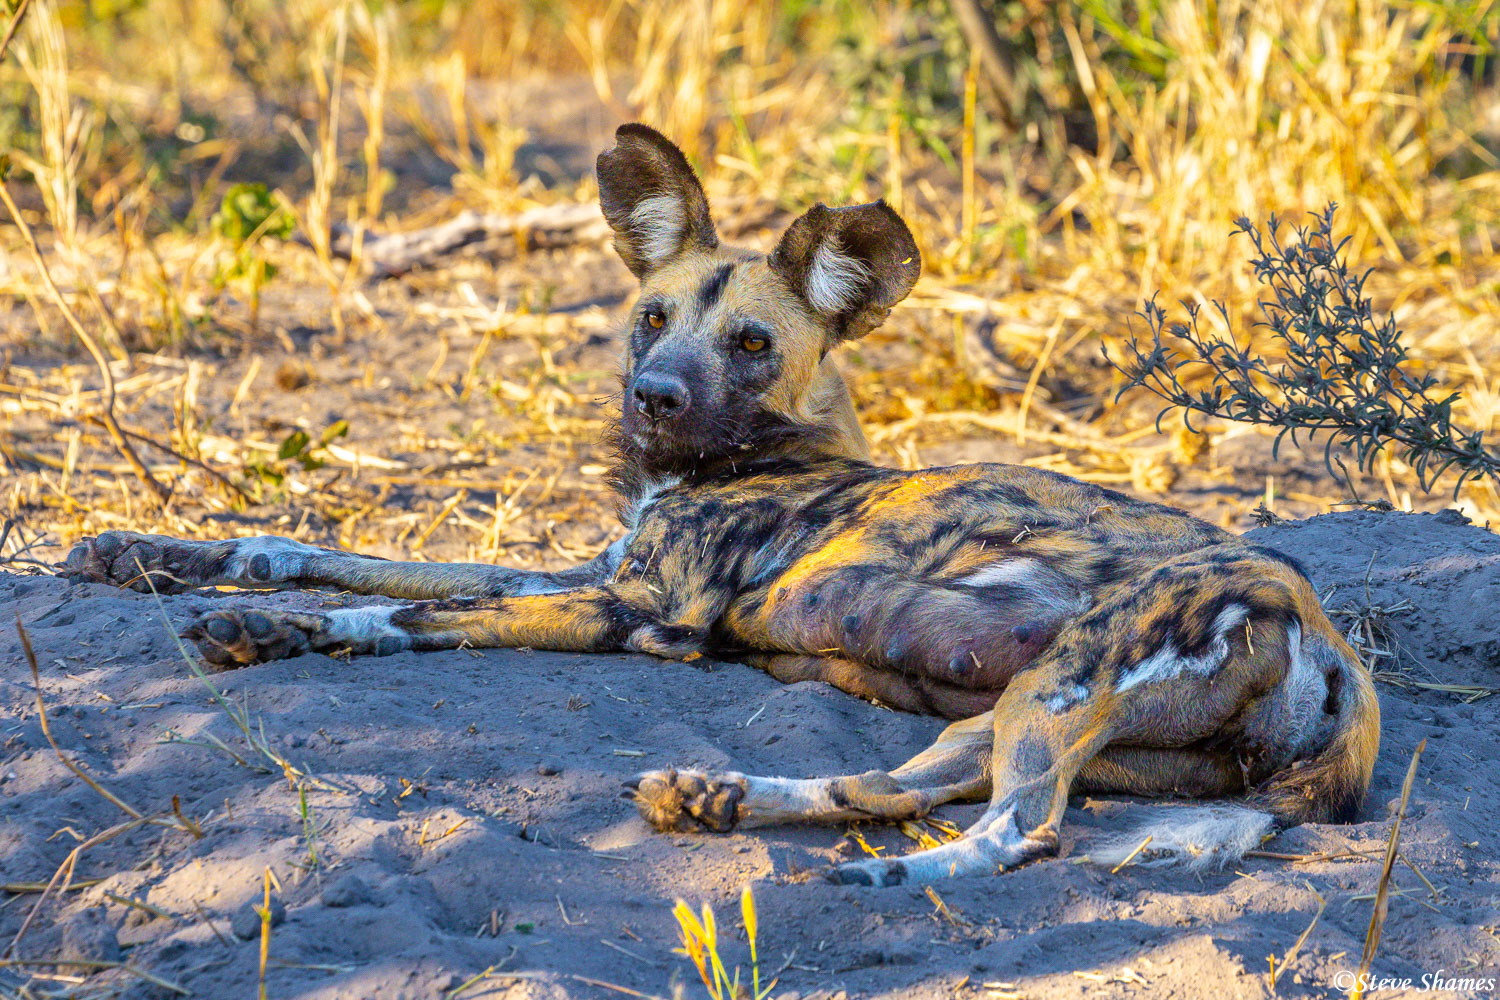 A Botswana wild dog relaxing in the shade.